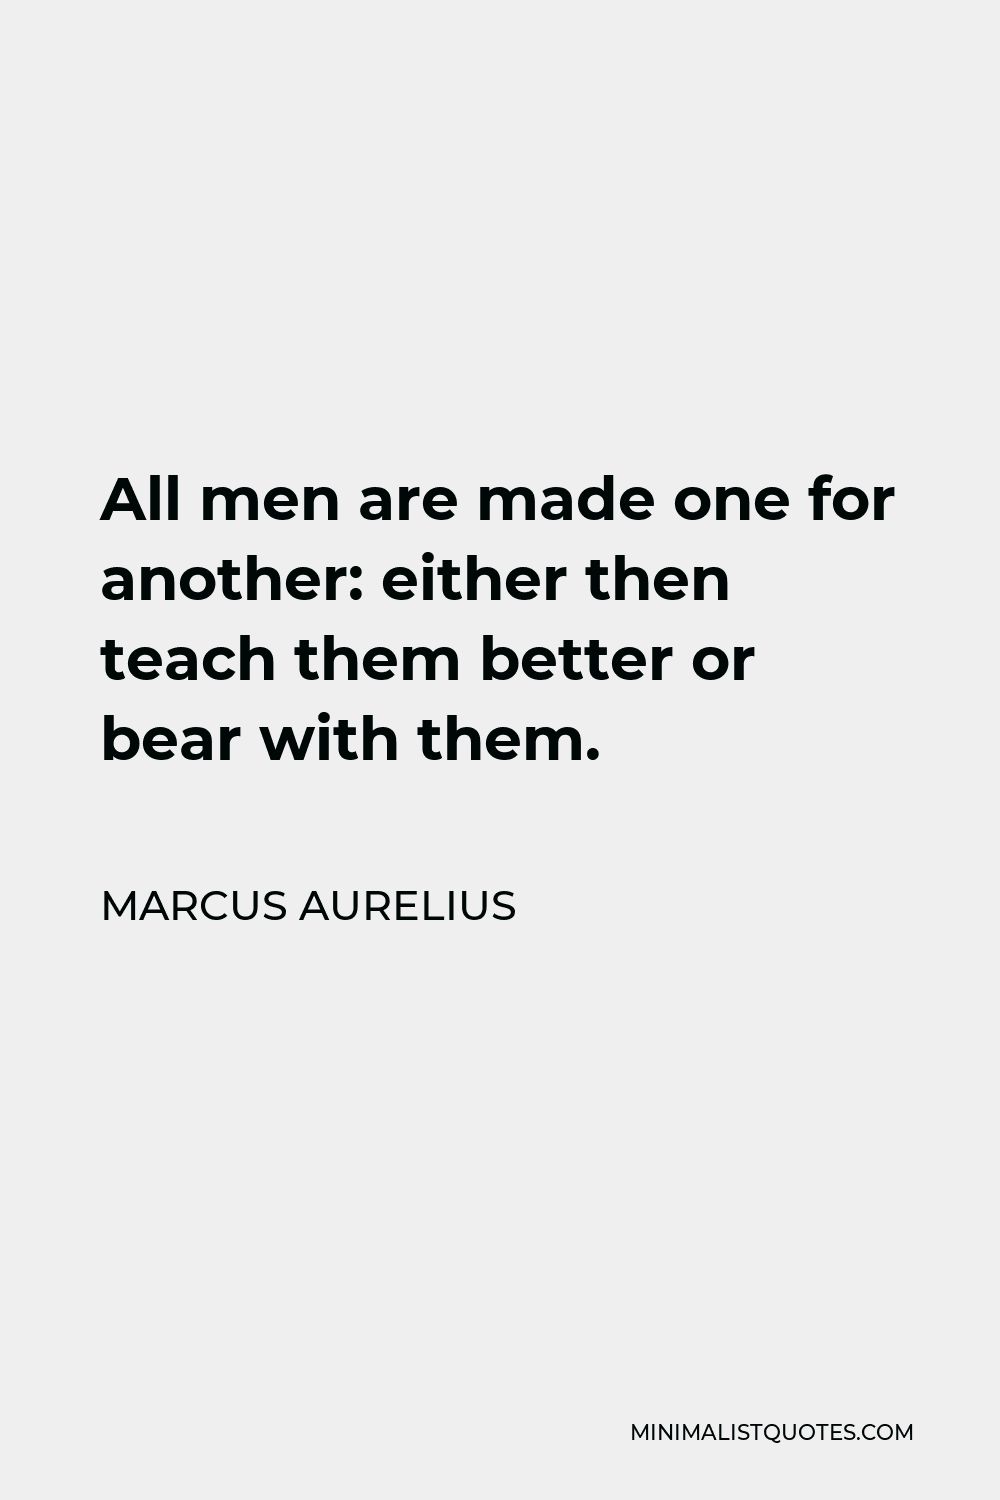 Marcus Aurelius Quote - All men are made one for another: either then teach them better or bear with them.